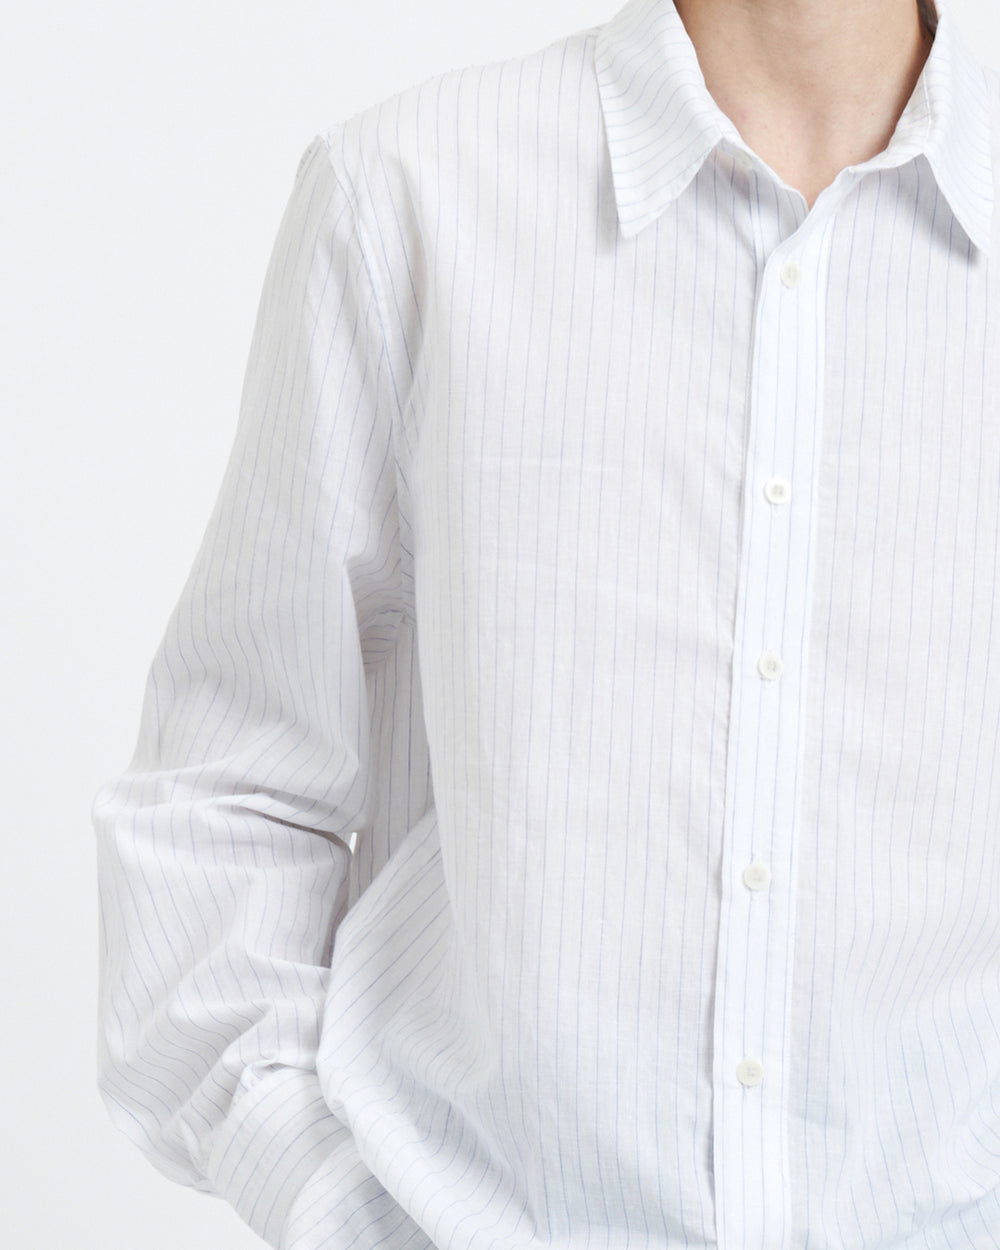 New Optimist menswear Primo | Relaxed pinstripe shirt Blouse